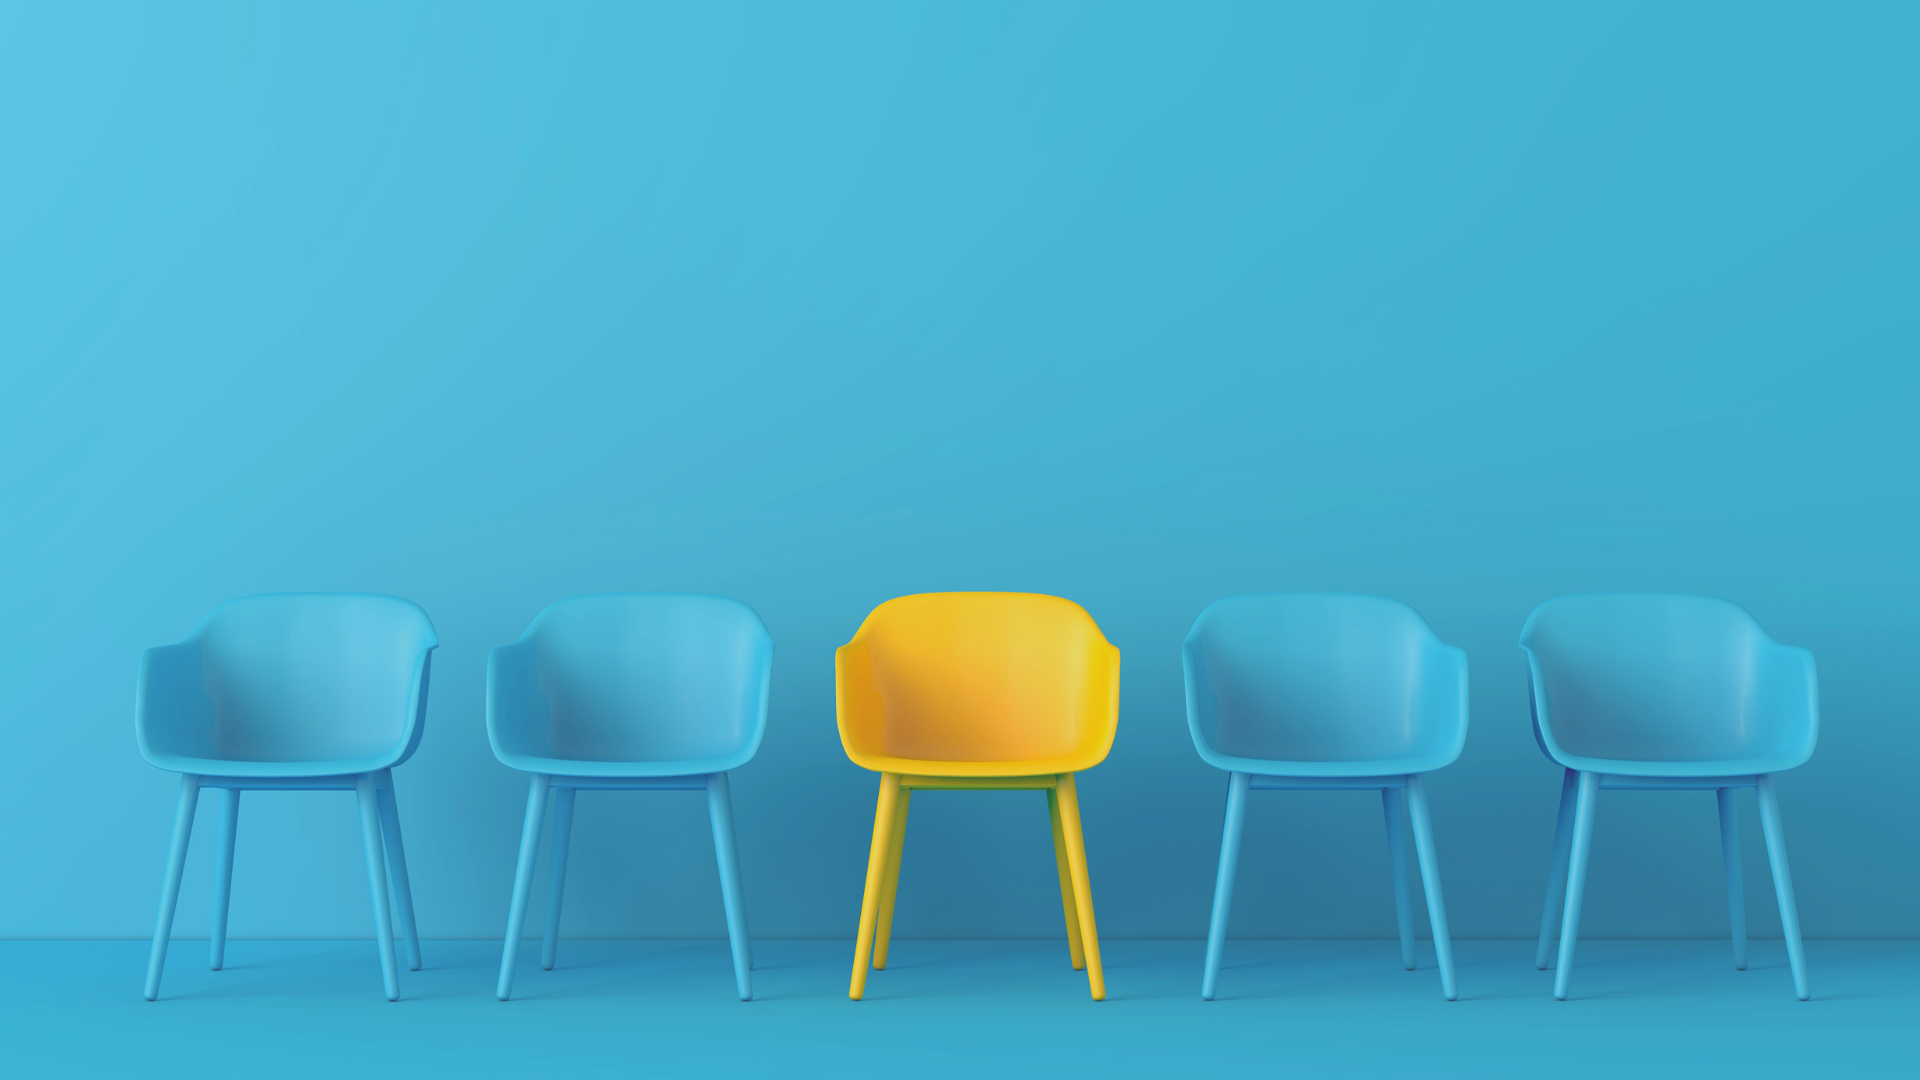 Row of blue chairs with yellow chair in the centre